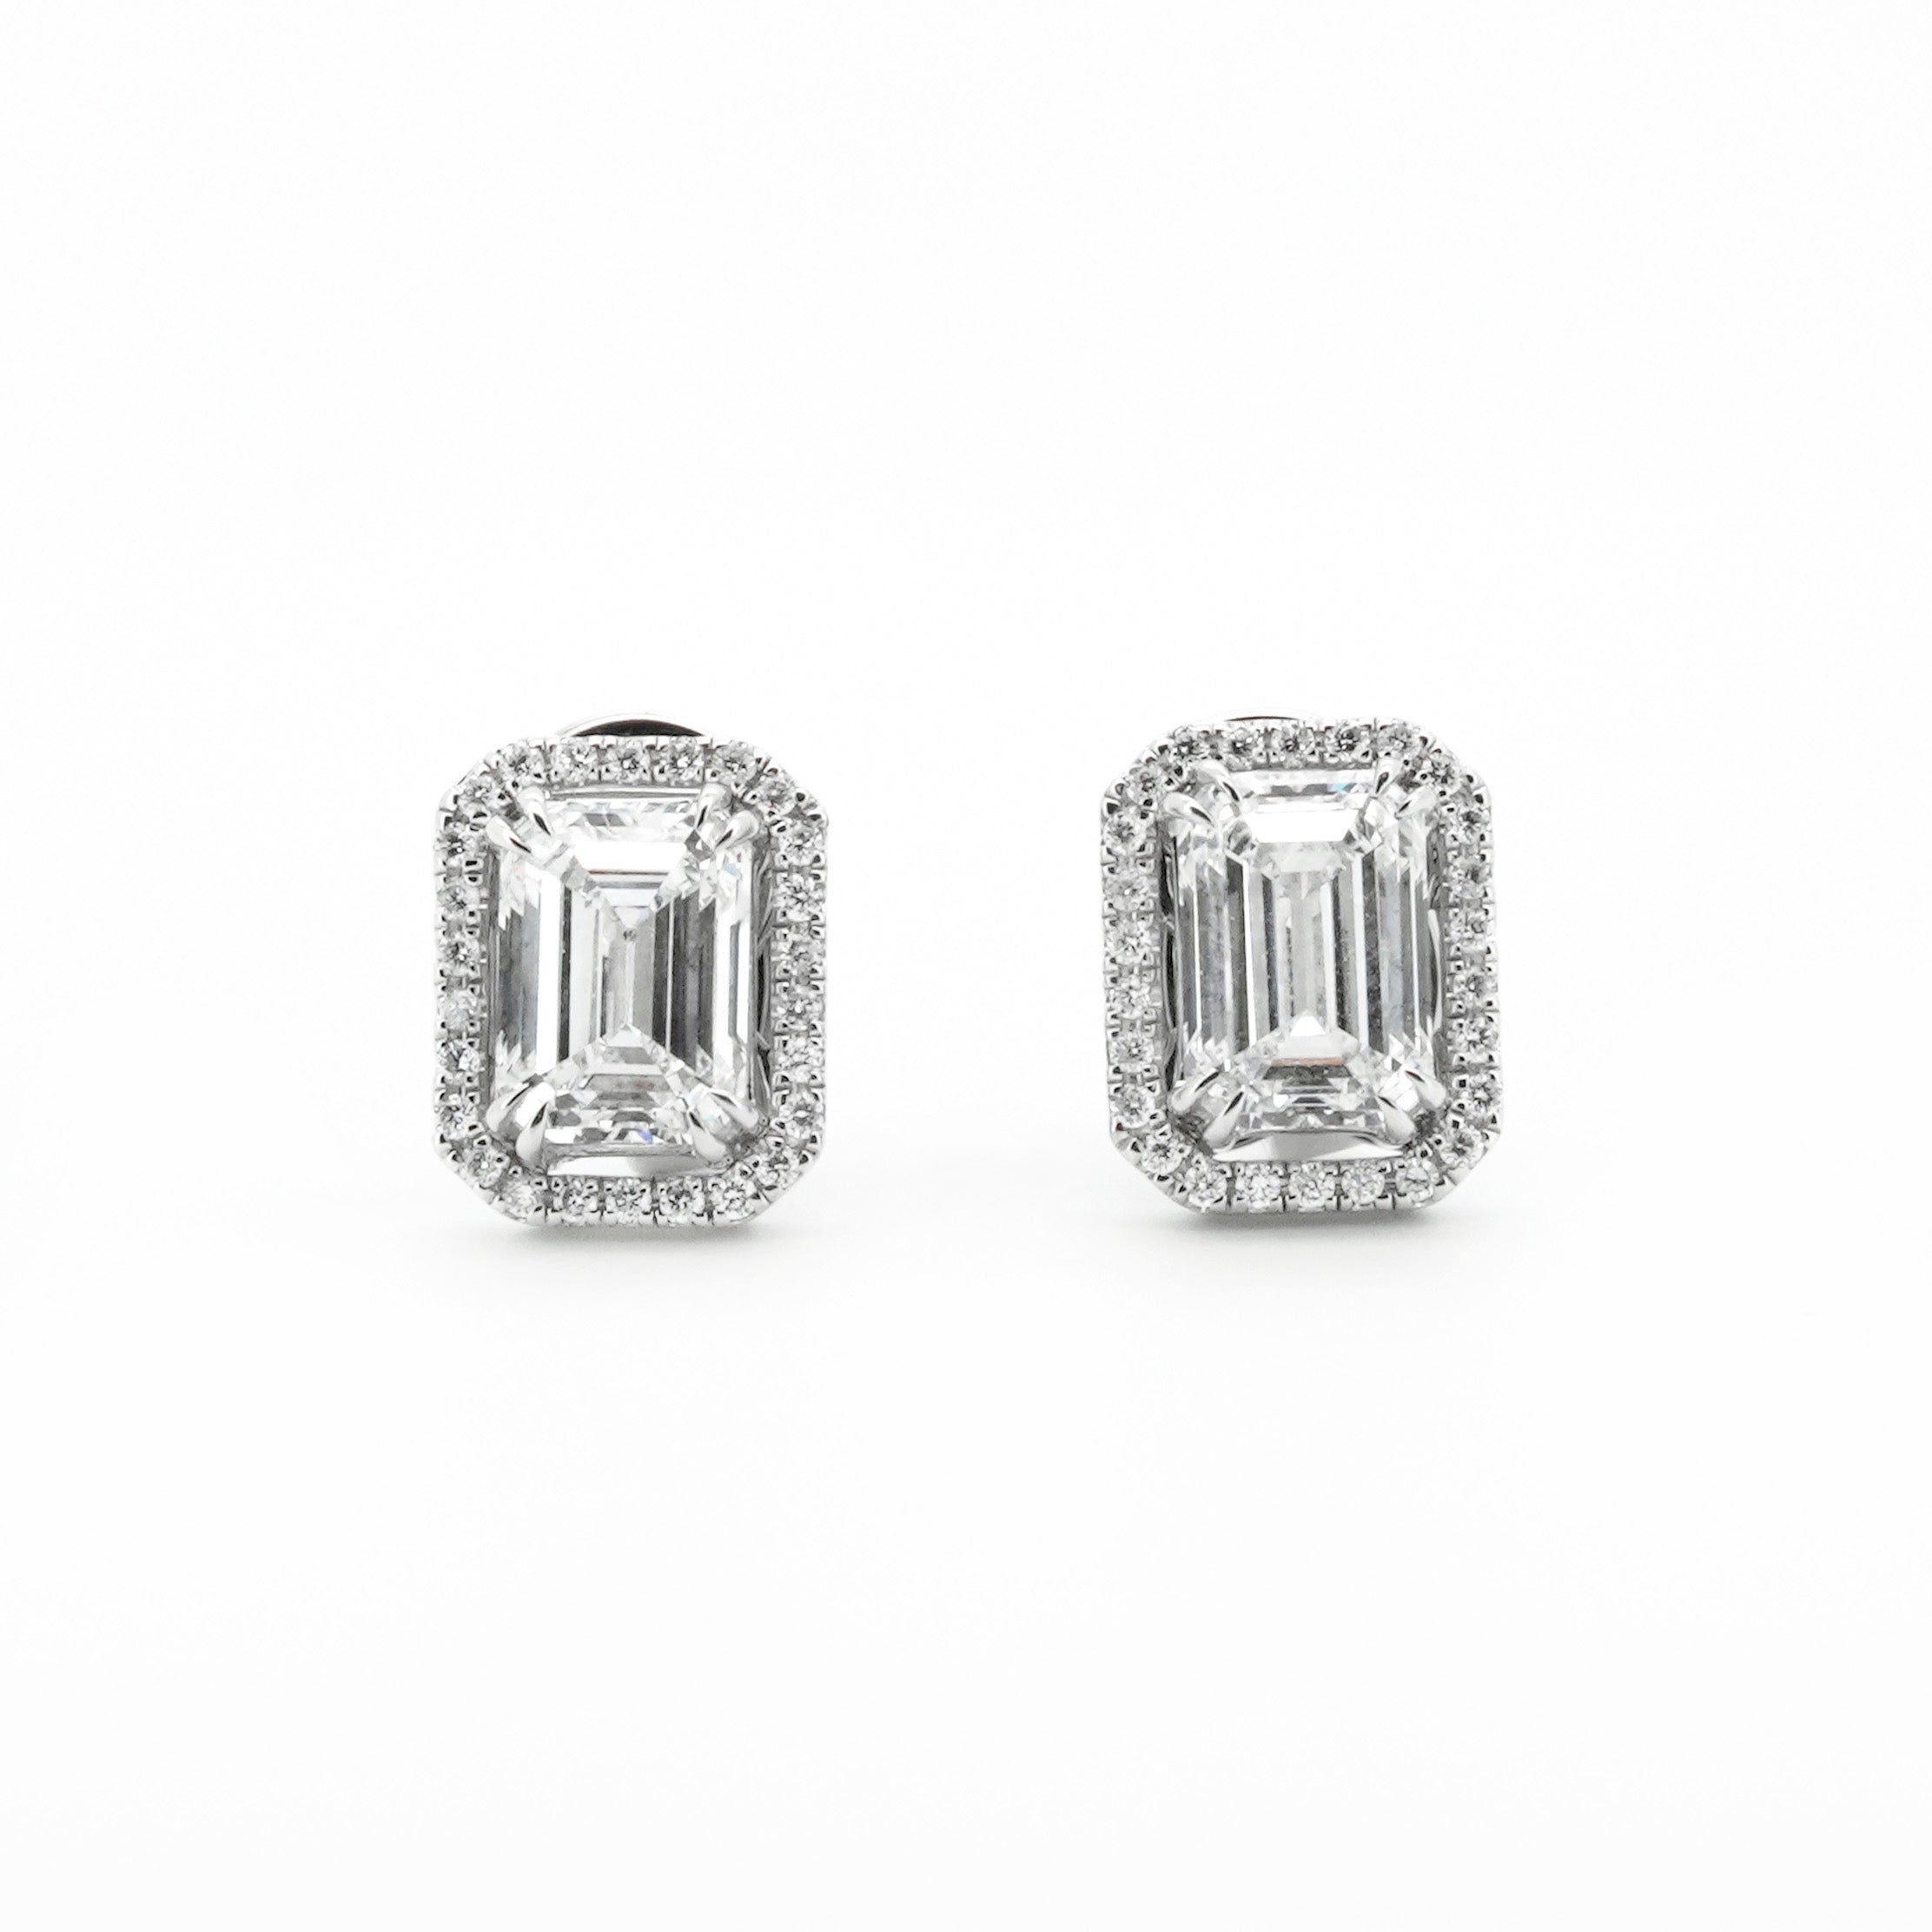 Emerald Diamond Stud Earrings with Removeable Halo | Sol et Terre